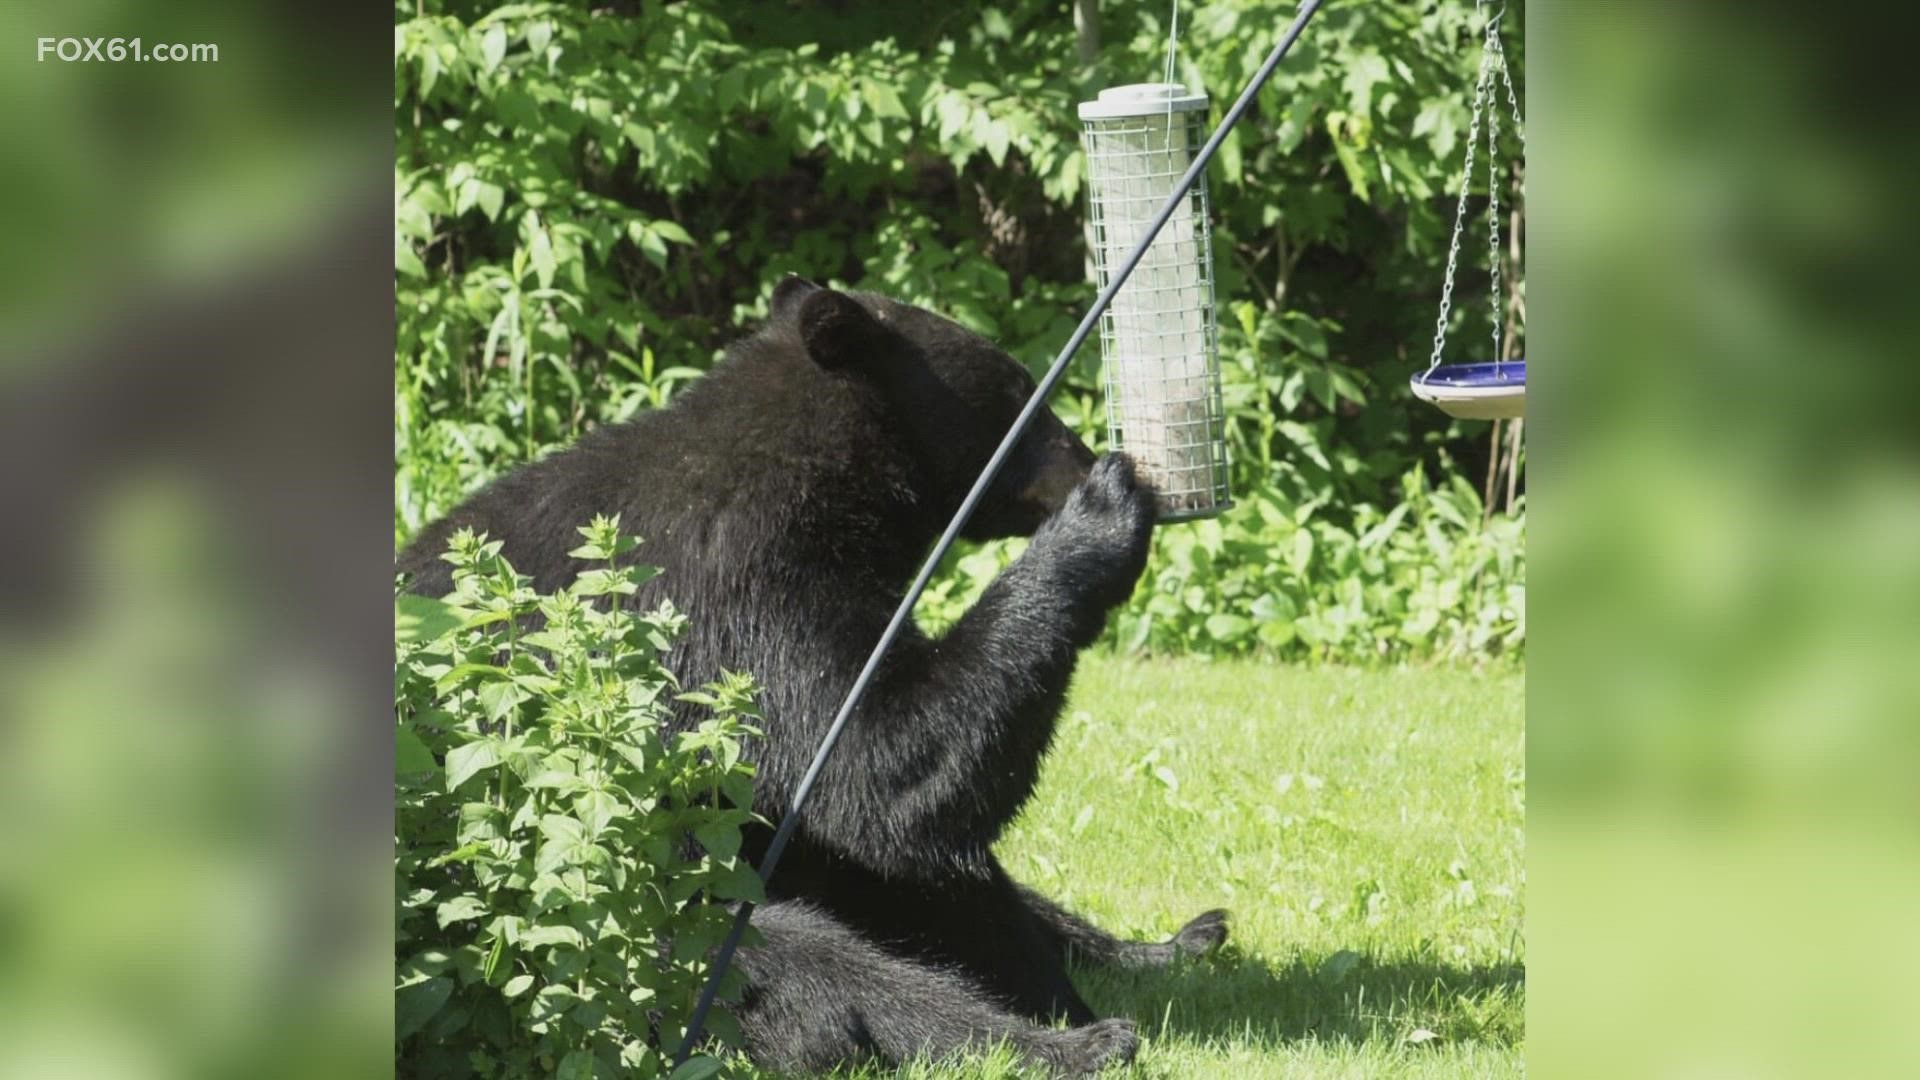 Many towns have monetary punishments for people purposely feeding bears.